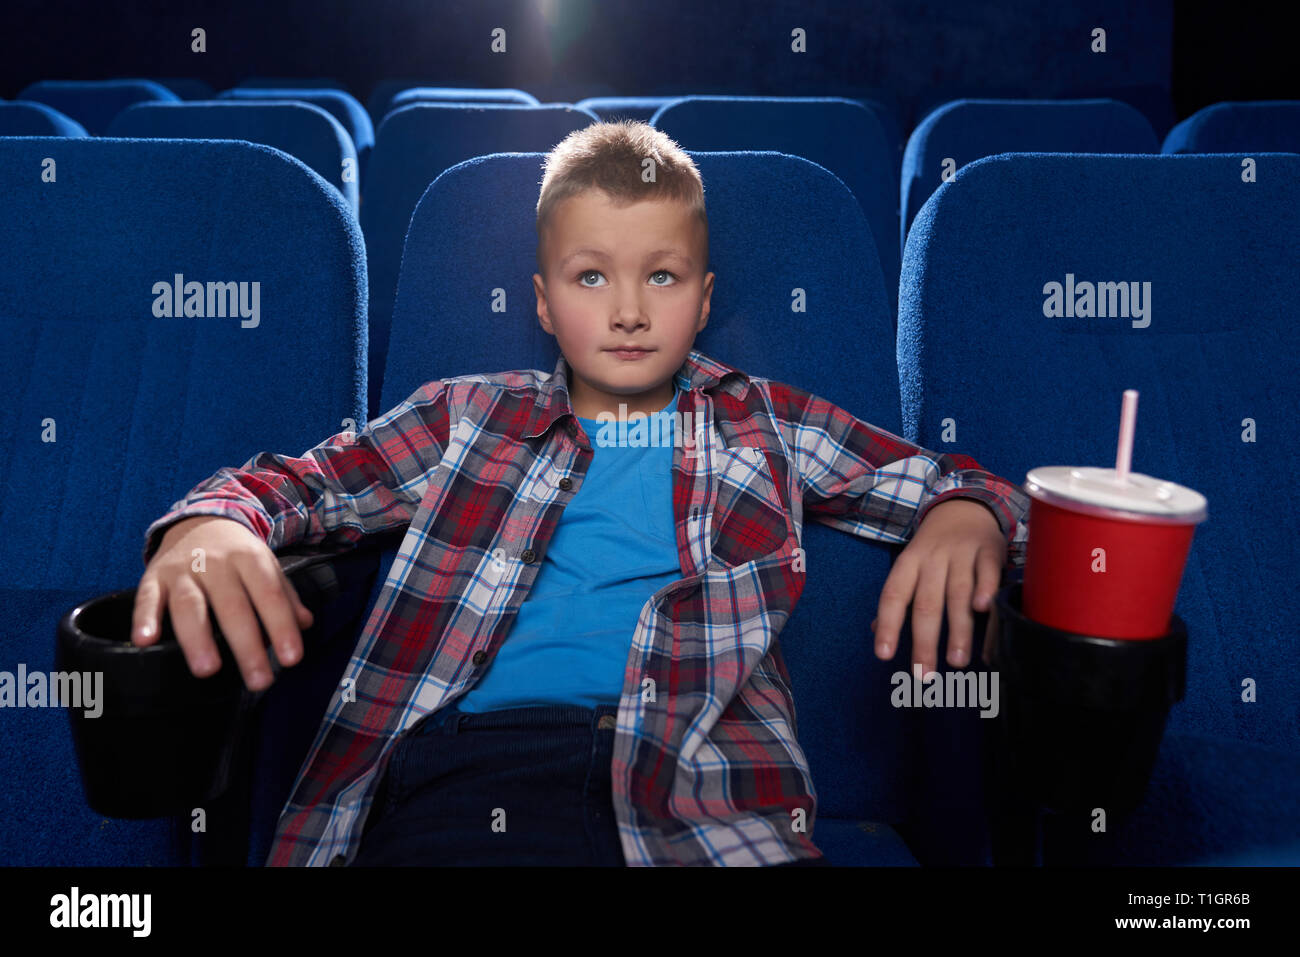 Boy sitting in comfortable chair in cinema theatre, watching movie attentively. Kid enjoying film or cartoon, red paper cup with fizzy drink. Entertainment concept. Stock Photo